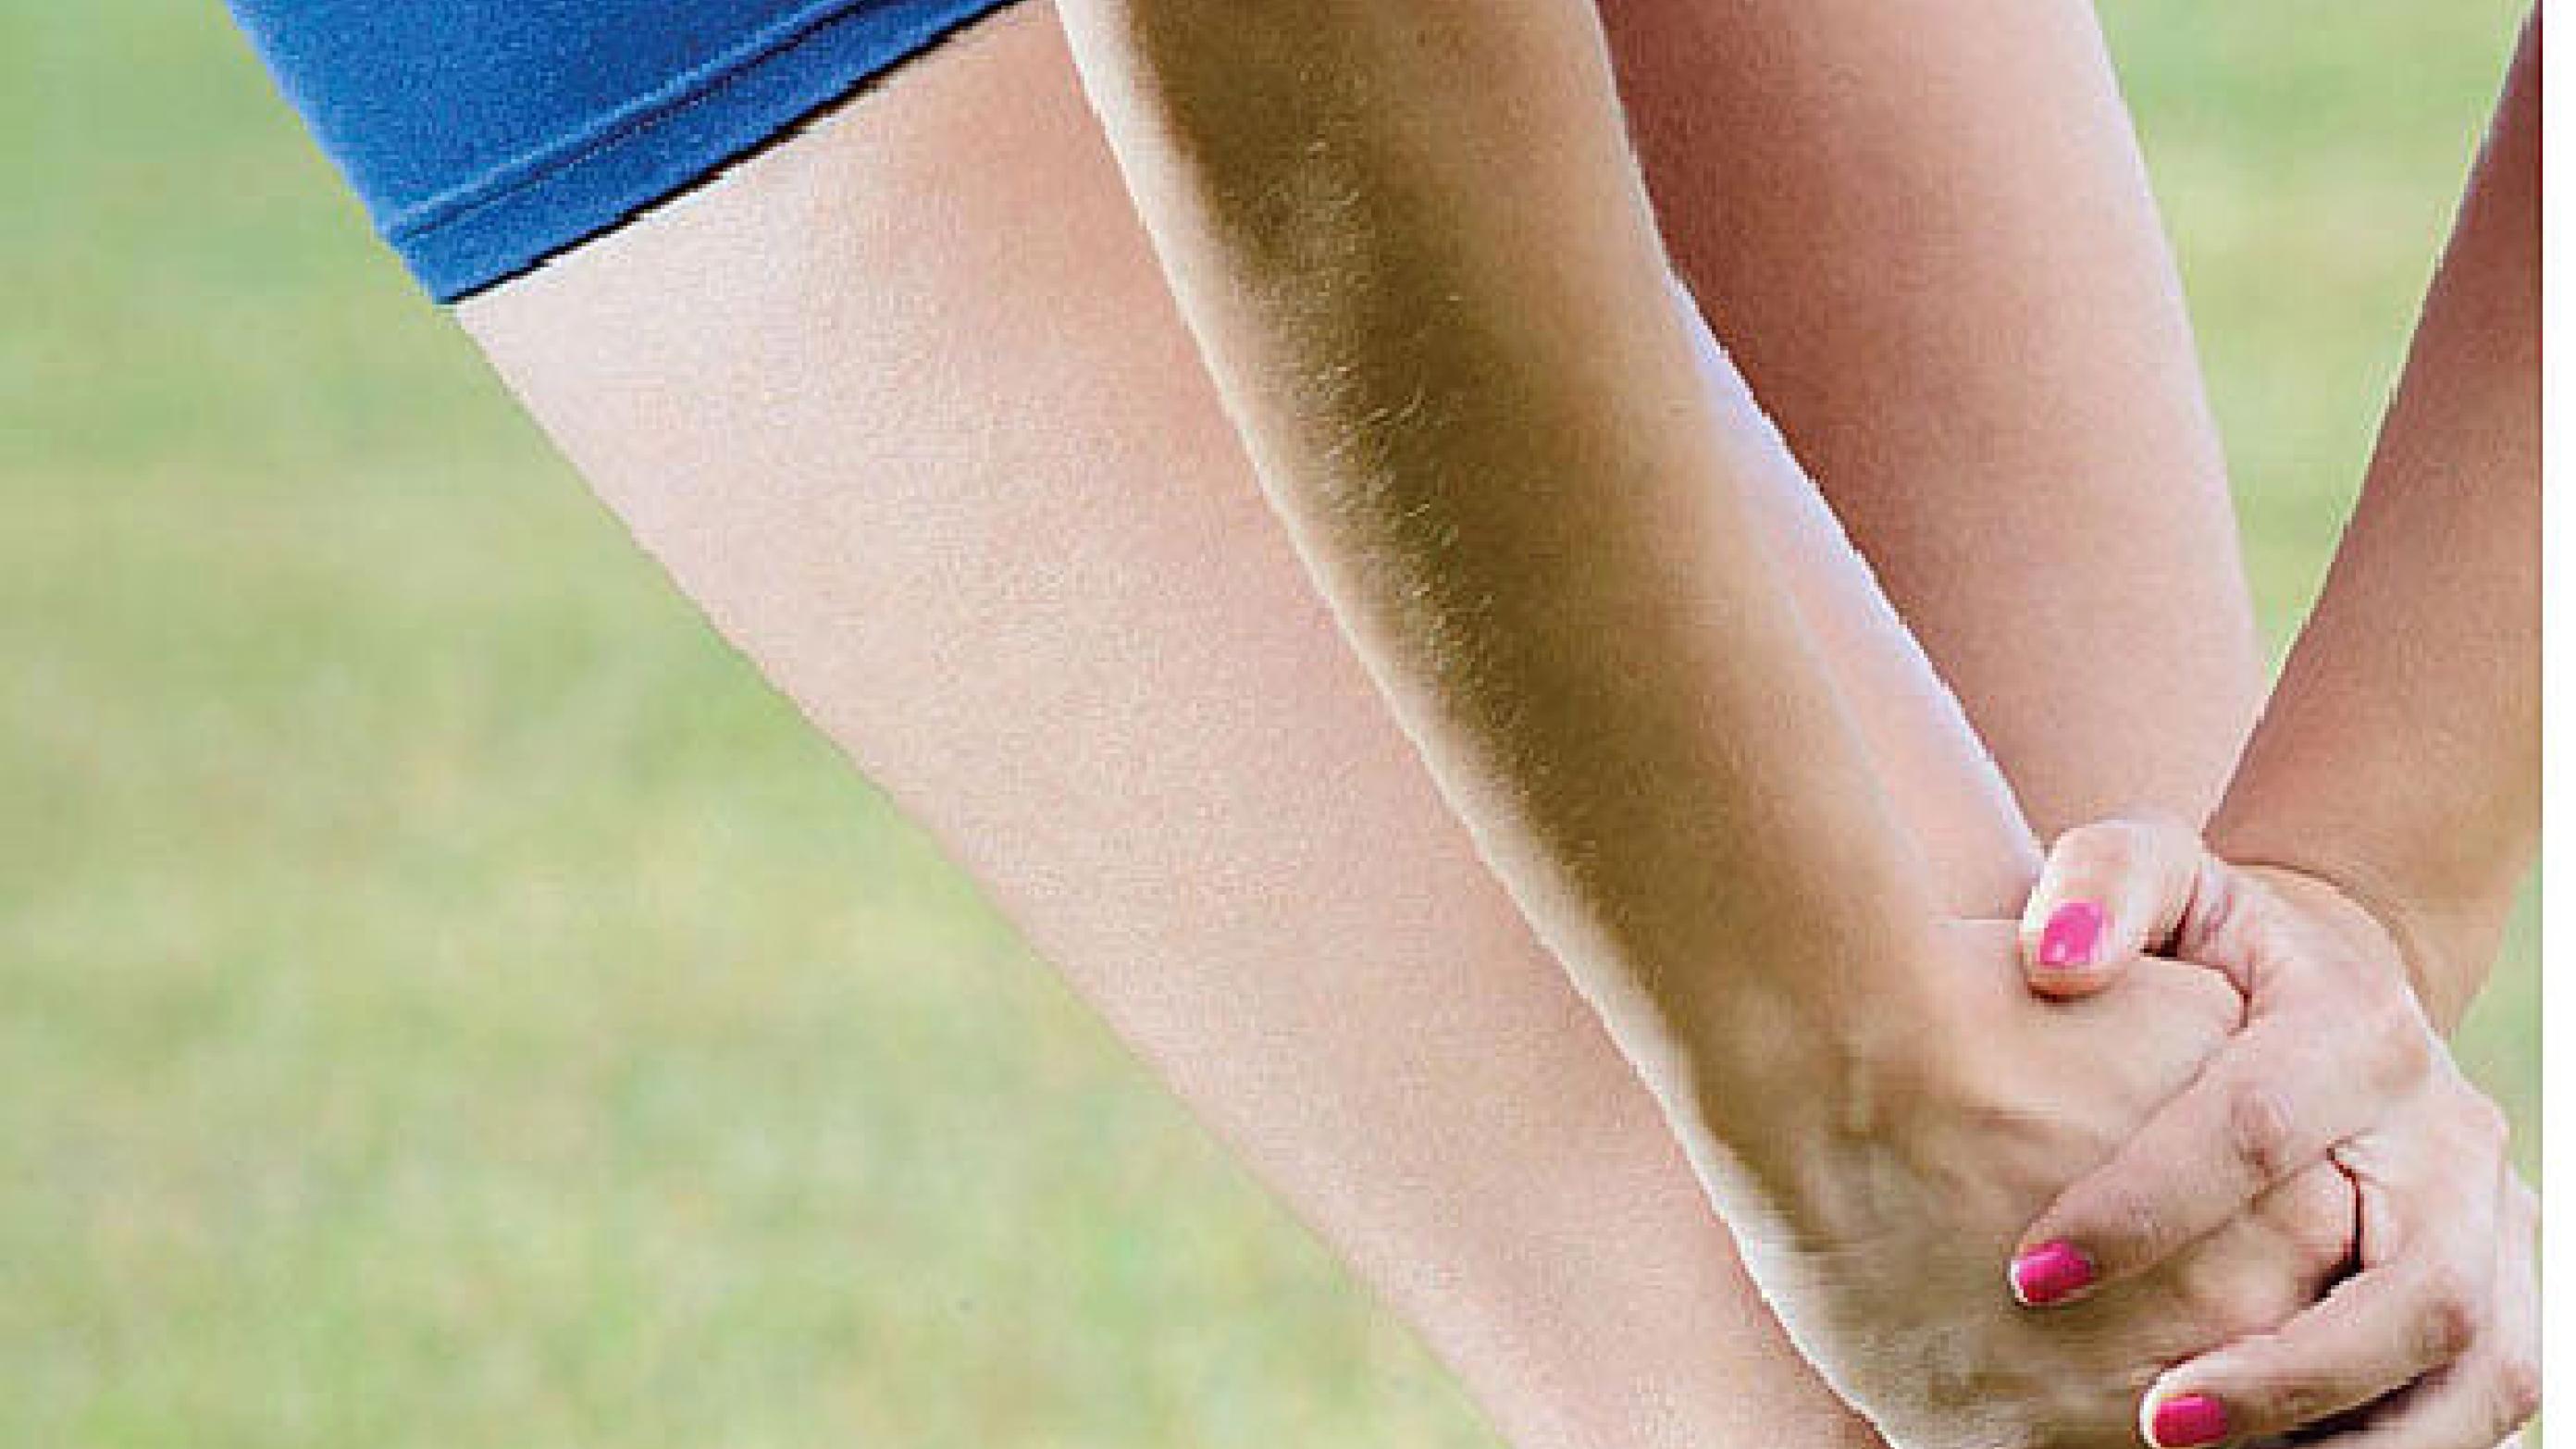 Adolescent knee pain is highly prevalent and 50% continue to report knee pain after one year.